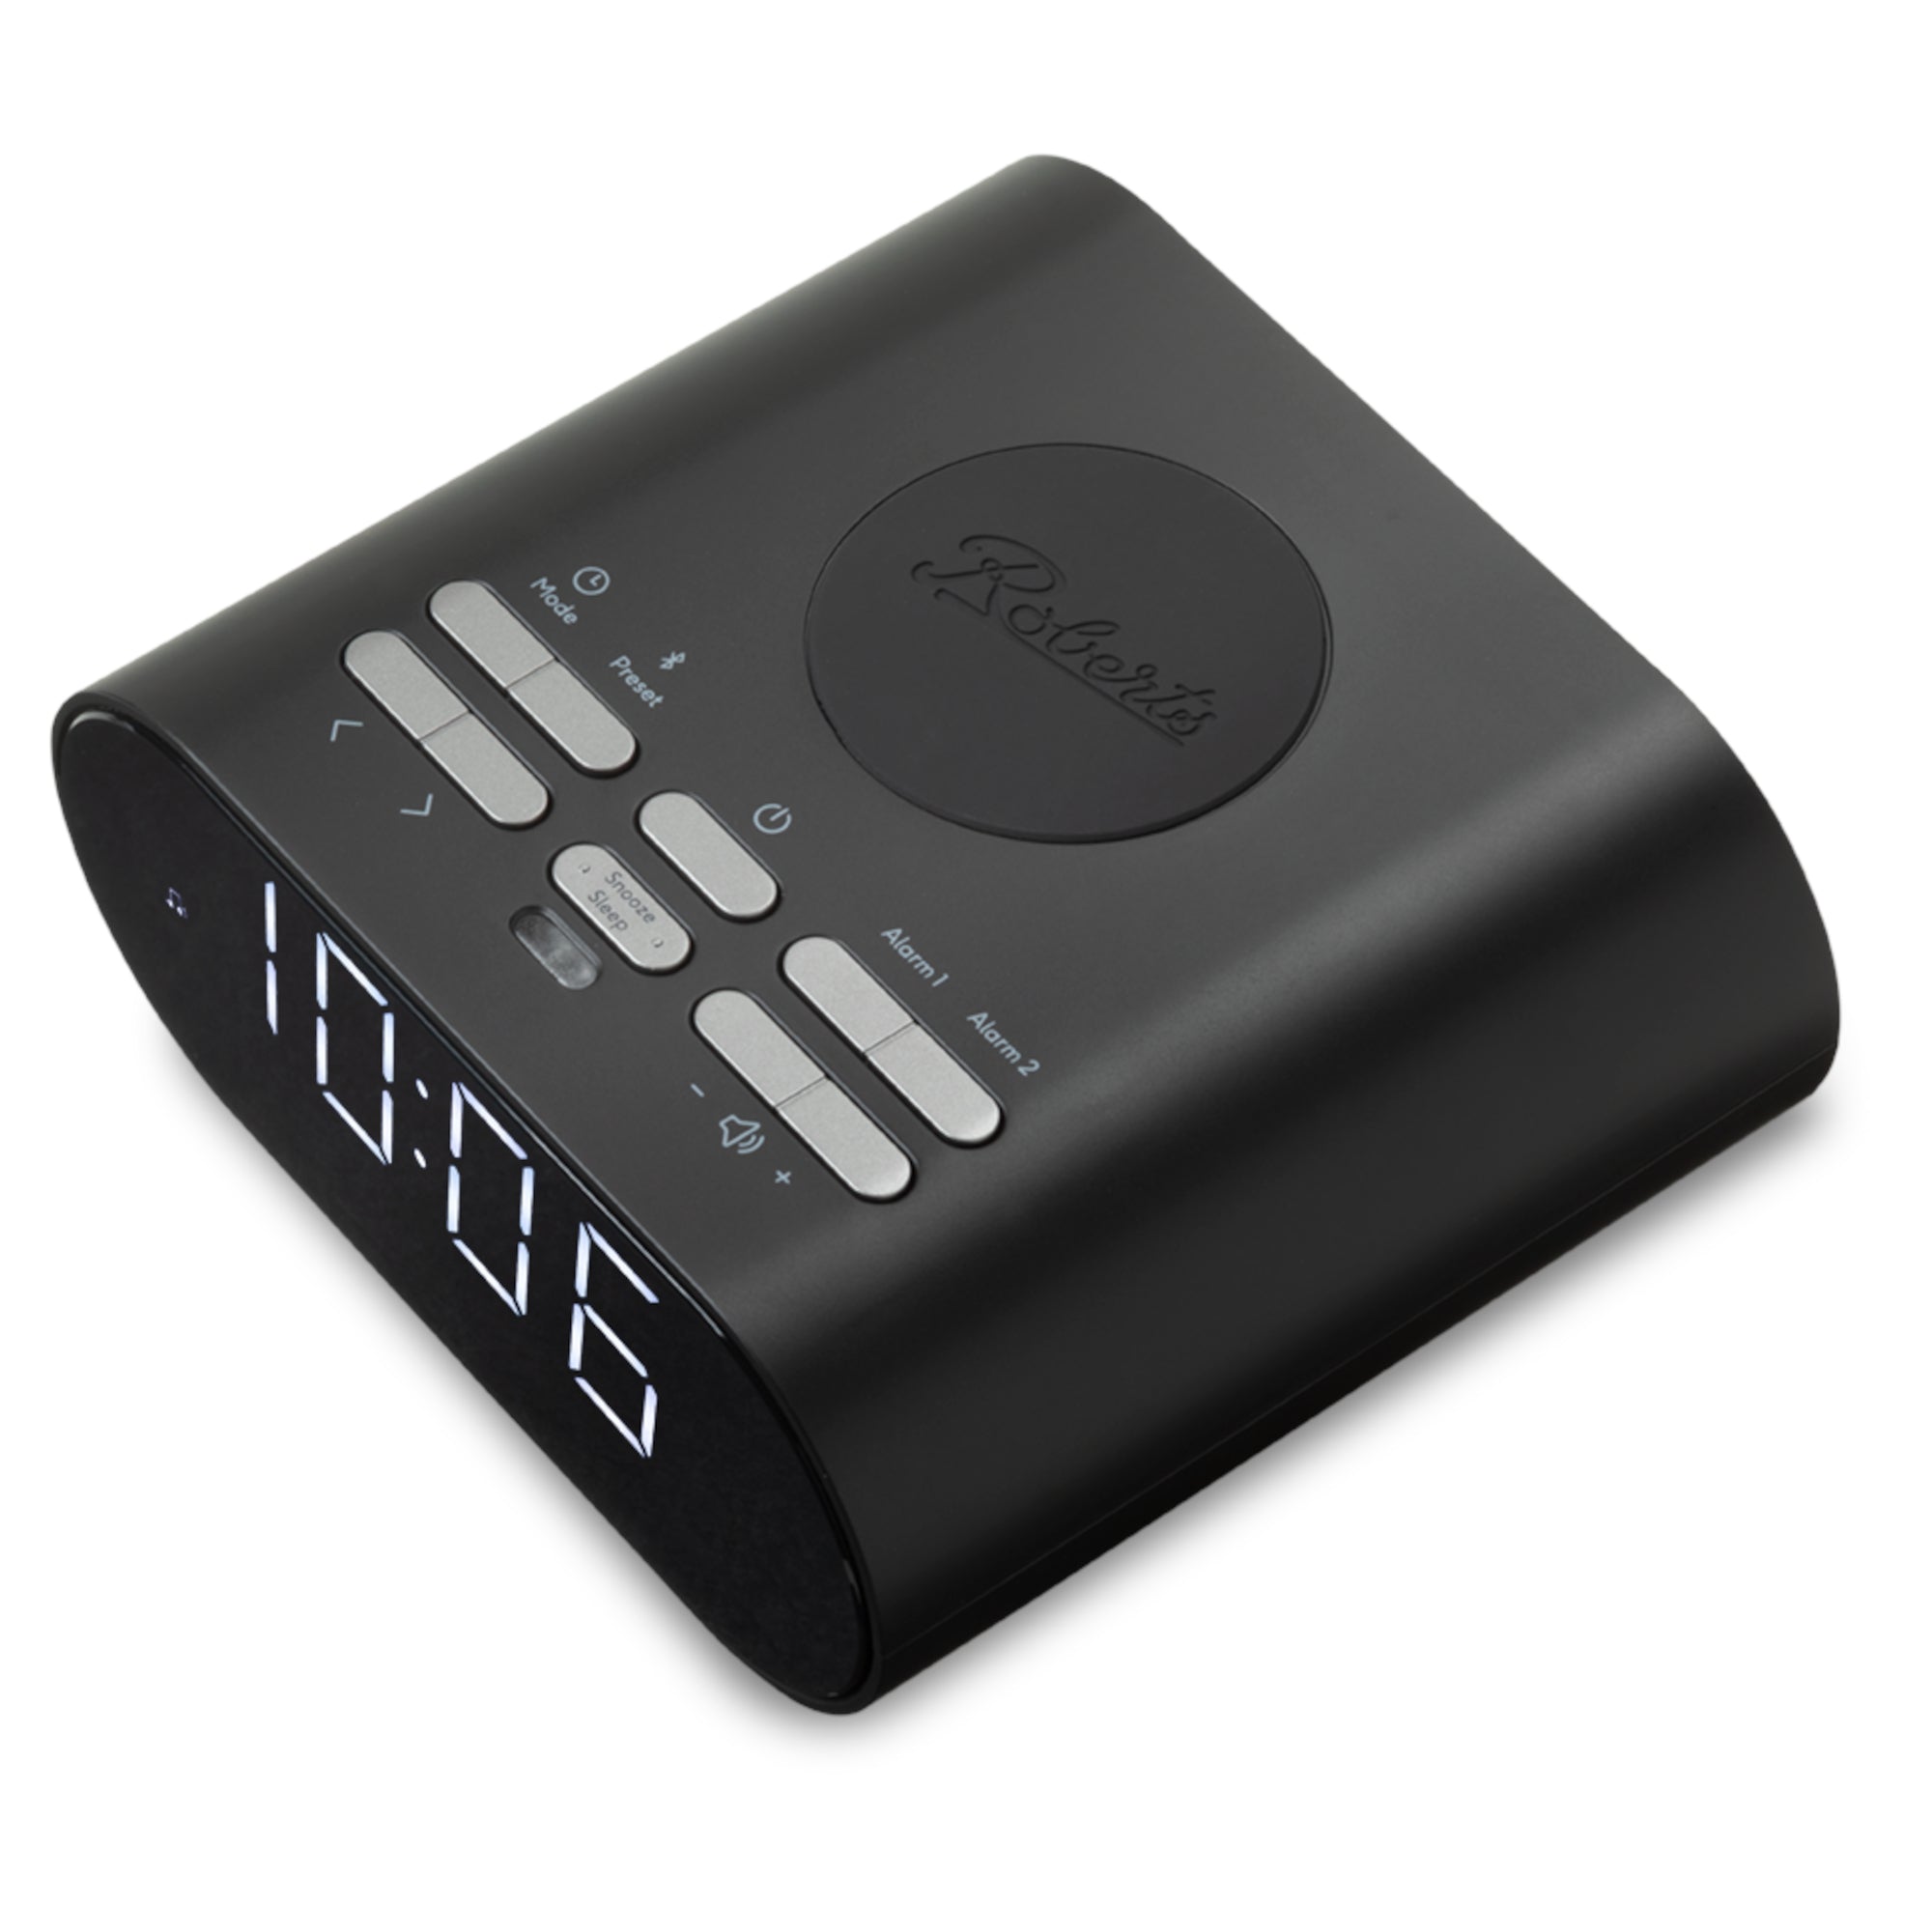 Roberts ORTUS-CHARGEBK Ortus Charge FM Radio with Wireless Charging